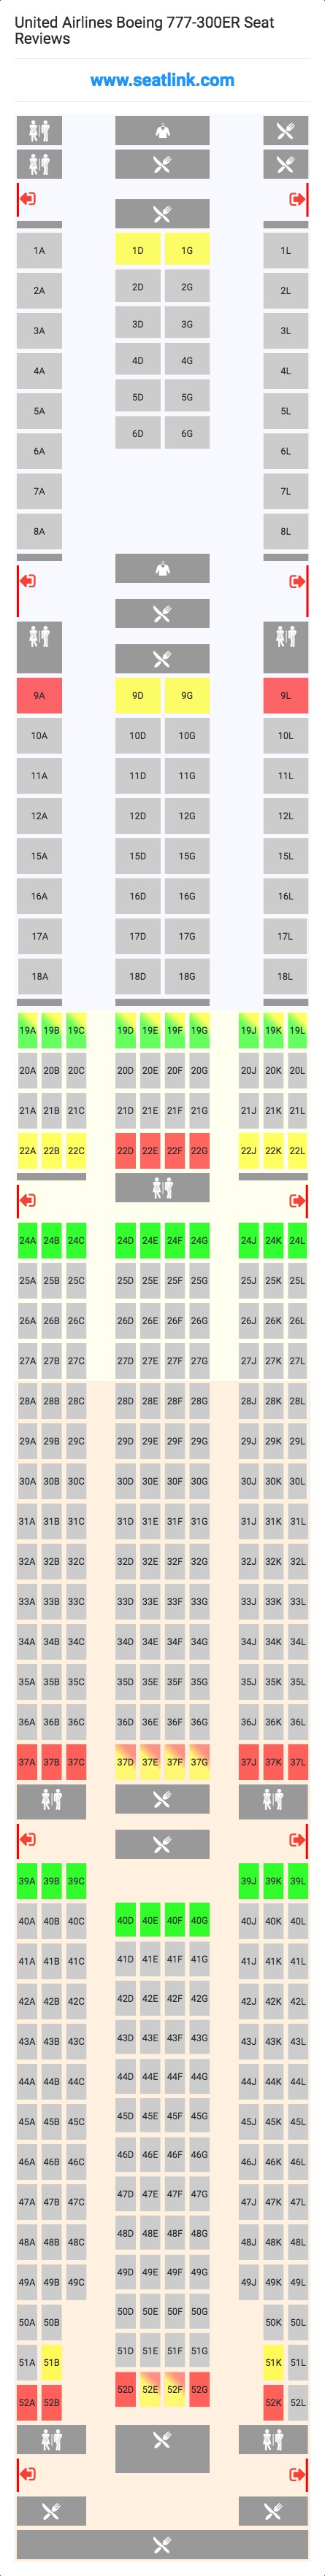 United Airlines Boeing 777-300ER (77W) Seat Map